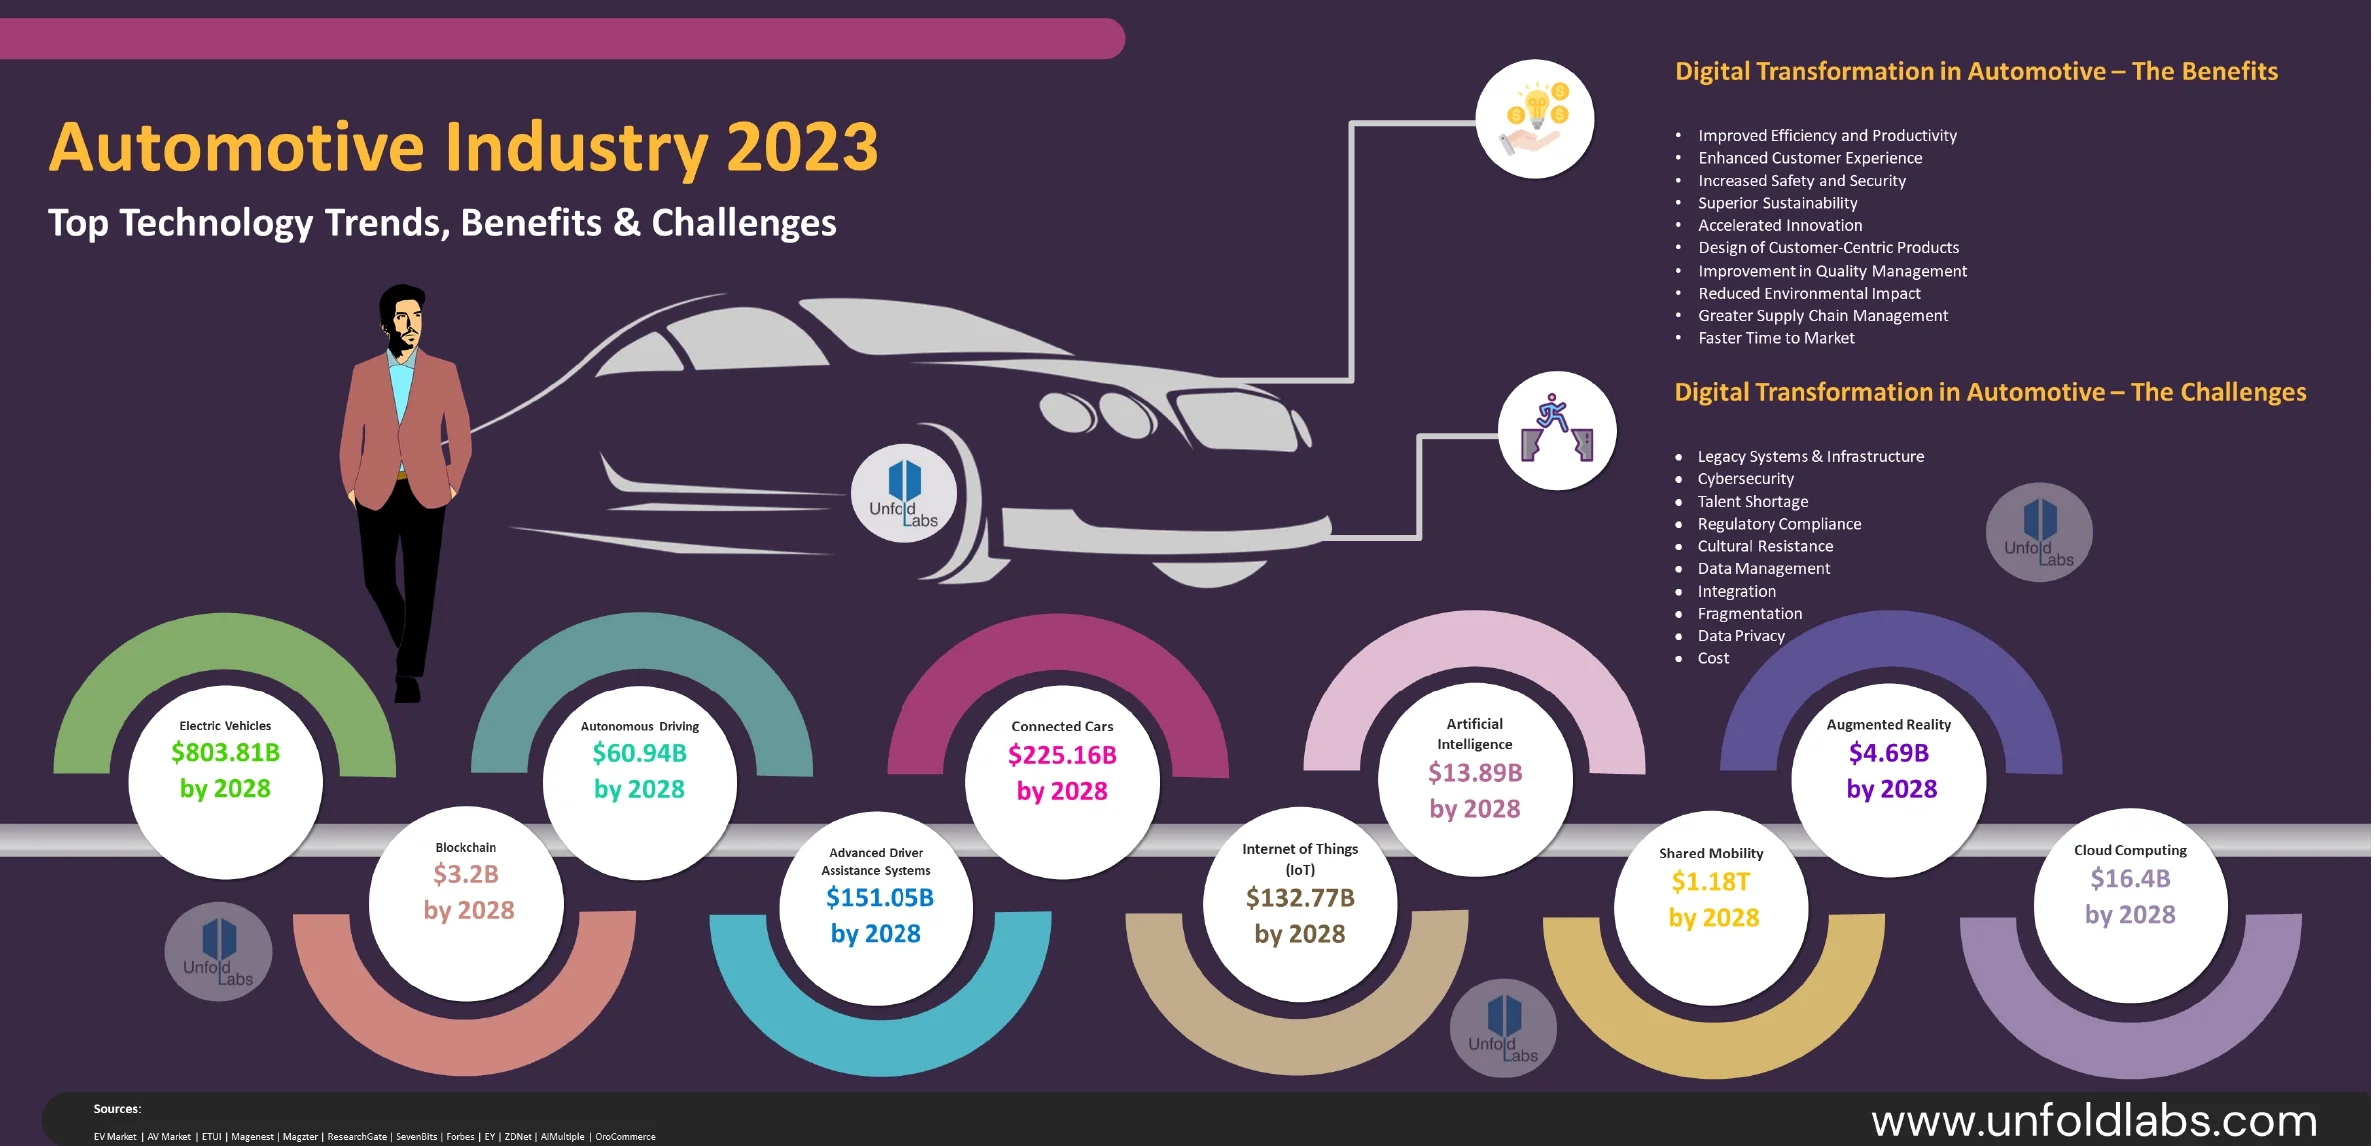 Growth of Automotive Industry 2023 - Benefits, Challenges &
                                    Use Cases